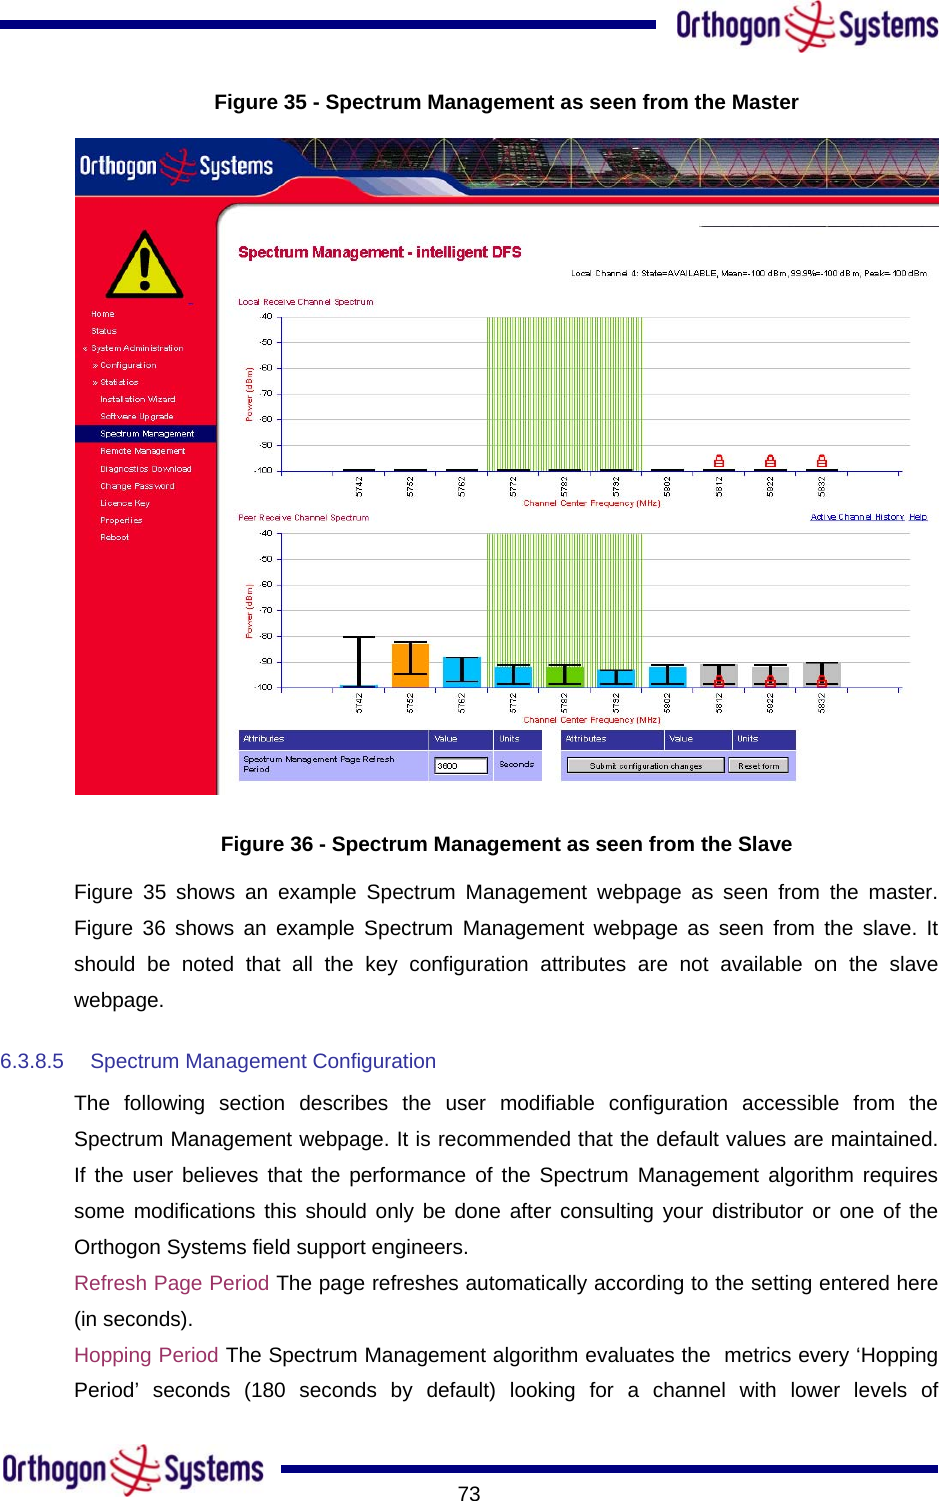       73Figure 35 - Spectrum Management as seen from the Master  Figure 36 - Spectrum Management as seen from the Slave Figure 35 shows an example Spectrum Management webpage as seen from the master. Figure 36 shows an example Spectrum Management webpage as seen from the slave. It should be noted that all the key configuration attributes are not available on the slave webpage. 6.3.8.5  Spectrum Management Configuration The following section describes the user modifiable configuration accessible from the Spectrum Management webpage. It is recommended that the default values are maintained. If the user believes that the performance of the Spectrum Management algorithm requires some modifications this should only be done after consulting your distributor or one of the Orthogon Systems field support engineers. Refresh Page Period The page refreshes automatically according to the setting entered here (in seconds).  Hopping Period The Spectrum Management algorithm evaluates the  metrics every ‘Hopping Period’ seconds (180 seconds by default) looking for a channel with lower levels of 